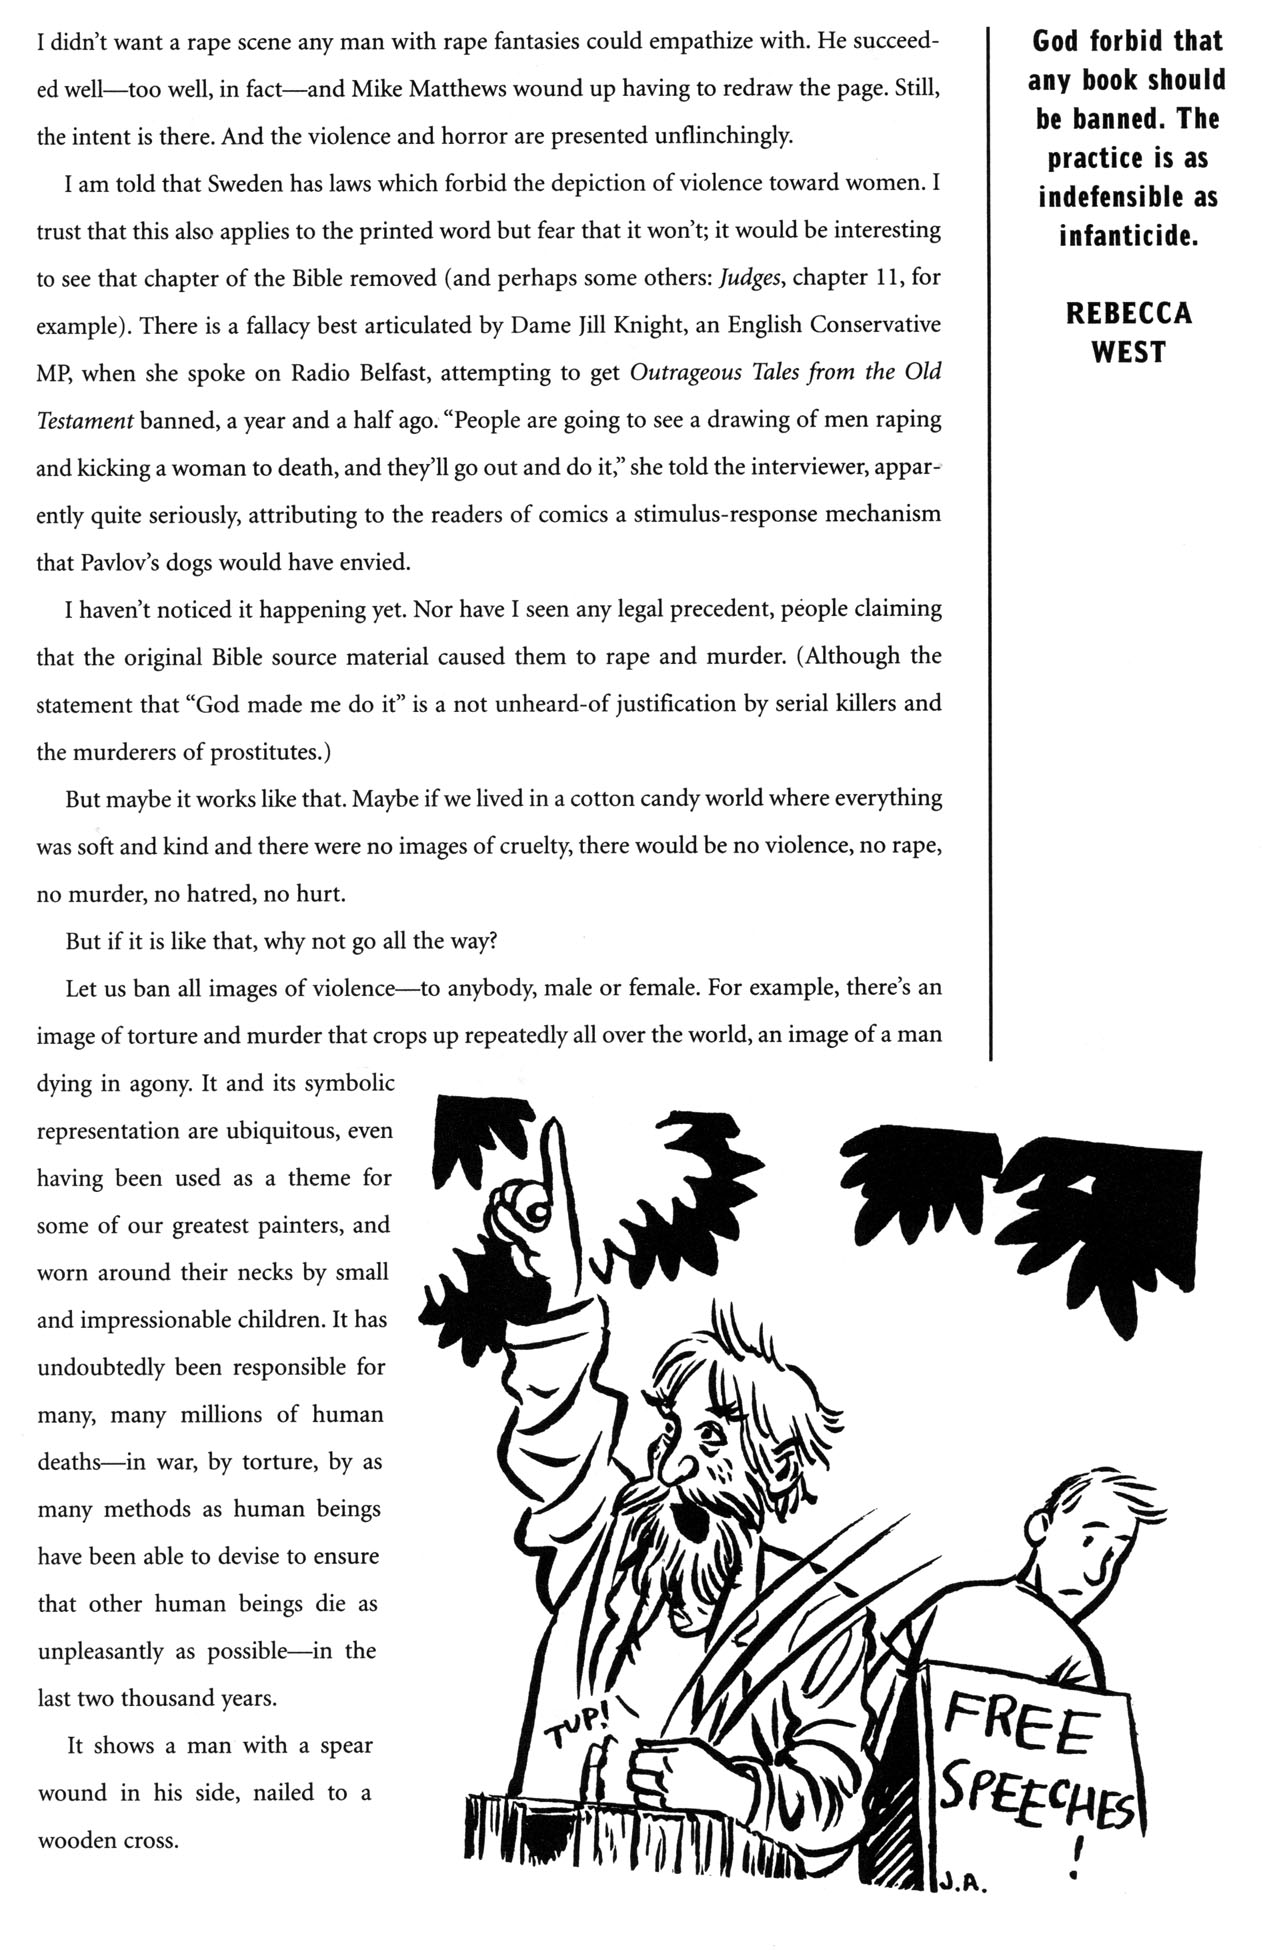 Read online Free Speeches comic -  Issue # Full - 37